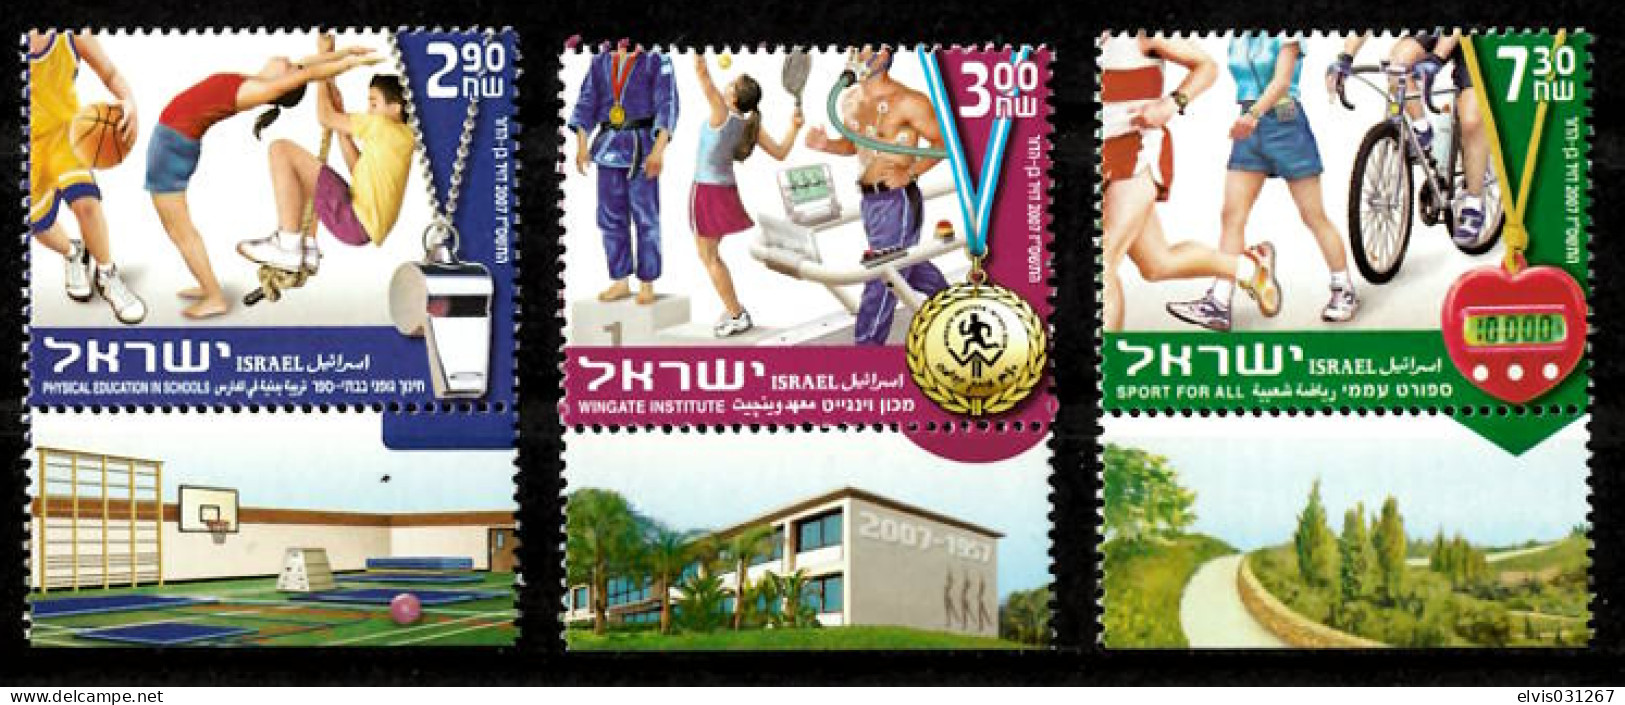 Israel - 2007, Michel/Philex No. : 1910-1912 - MNH - - Unused Stamps (with Tabs)